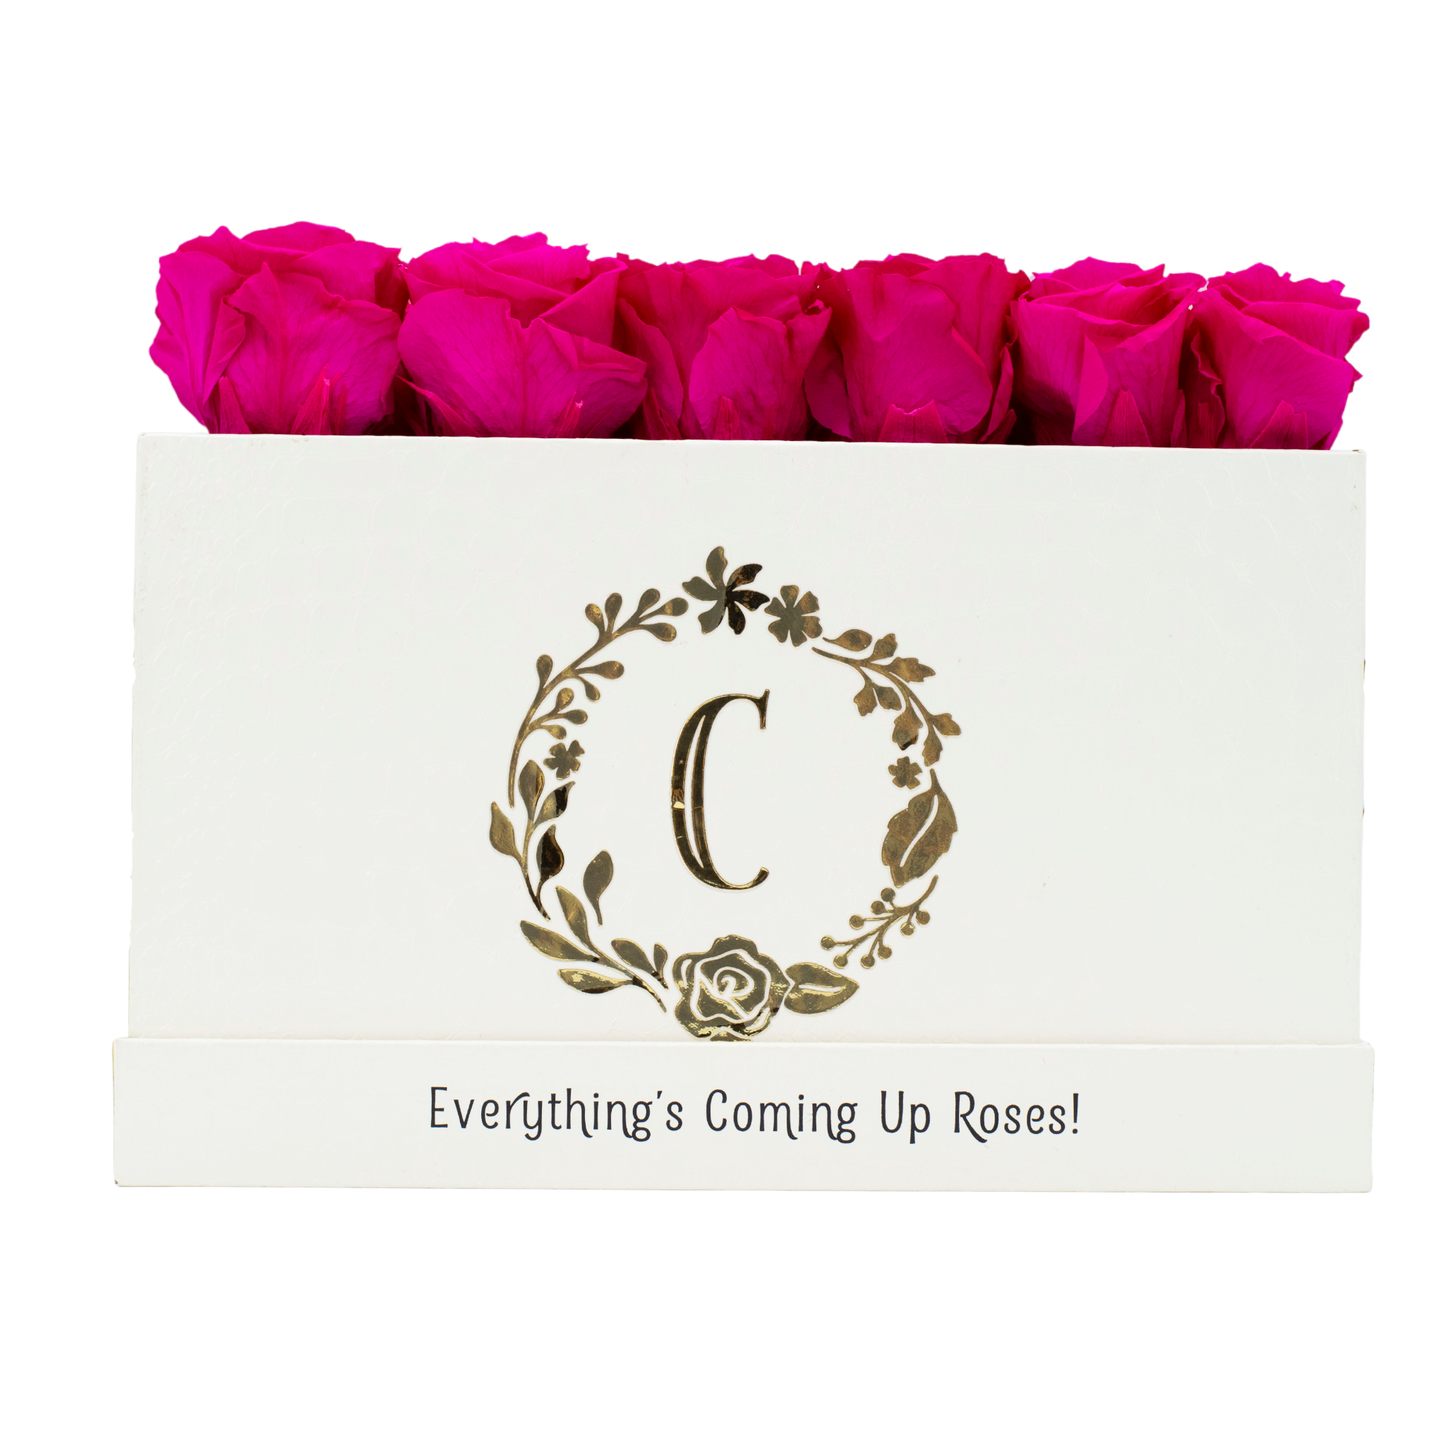 The White Monogrammed Keeper by the Dozen - Raspberry Punch Roses